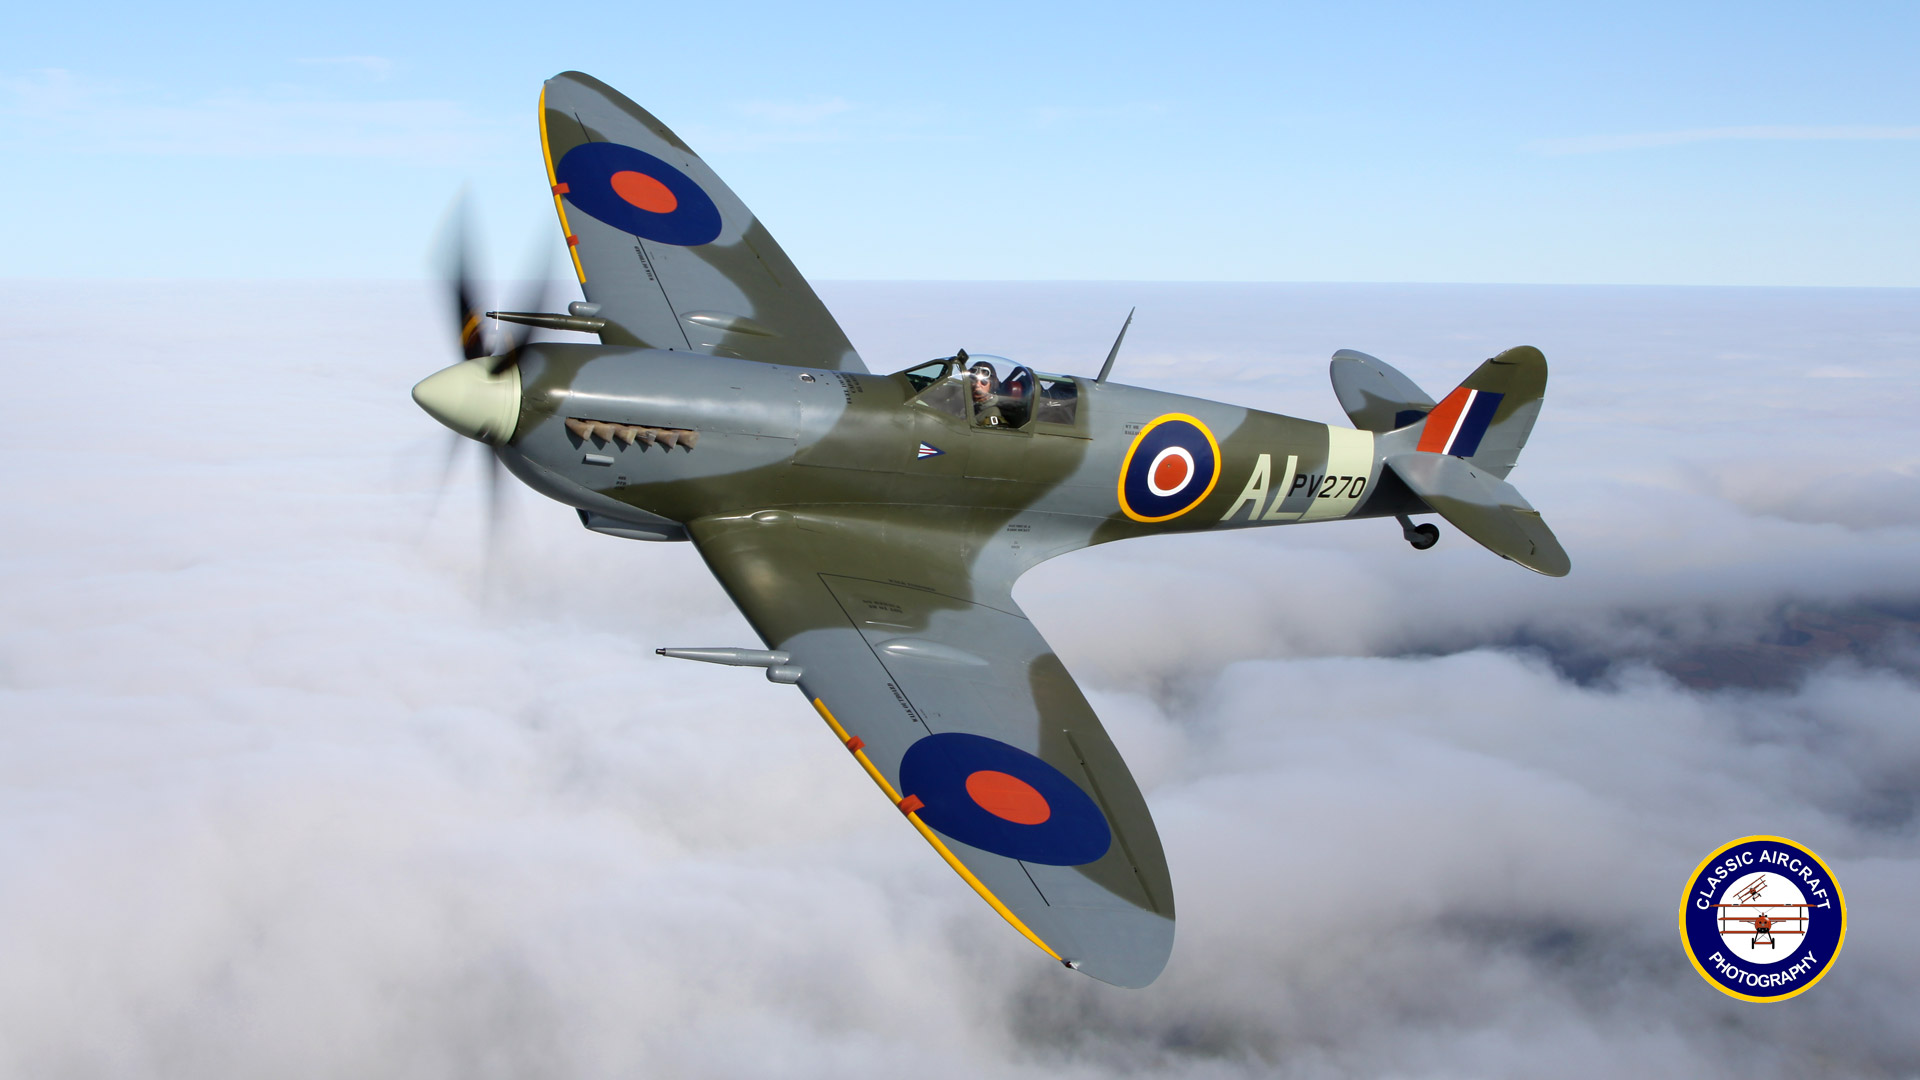 Spitfire Wallpaper Aoo421 HDq Cover For